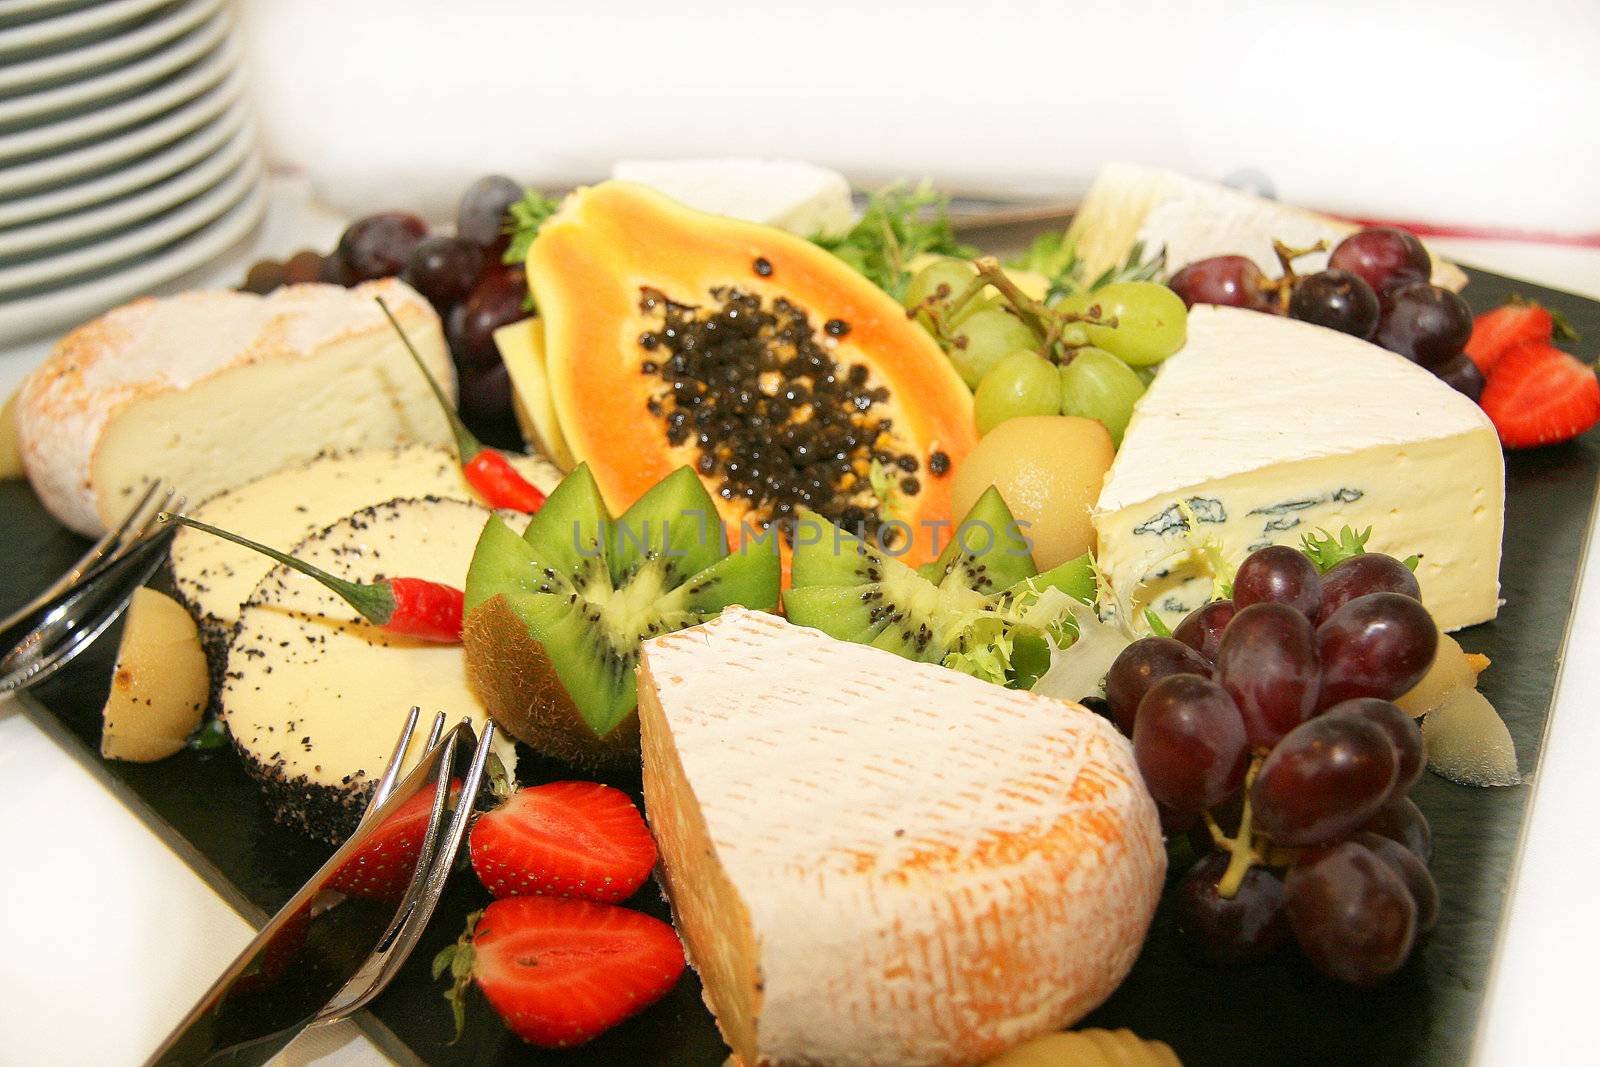 Cheese platter with different types of cheese grapes, kiwi and strawberries